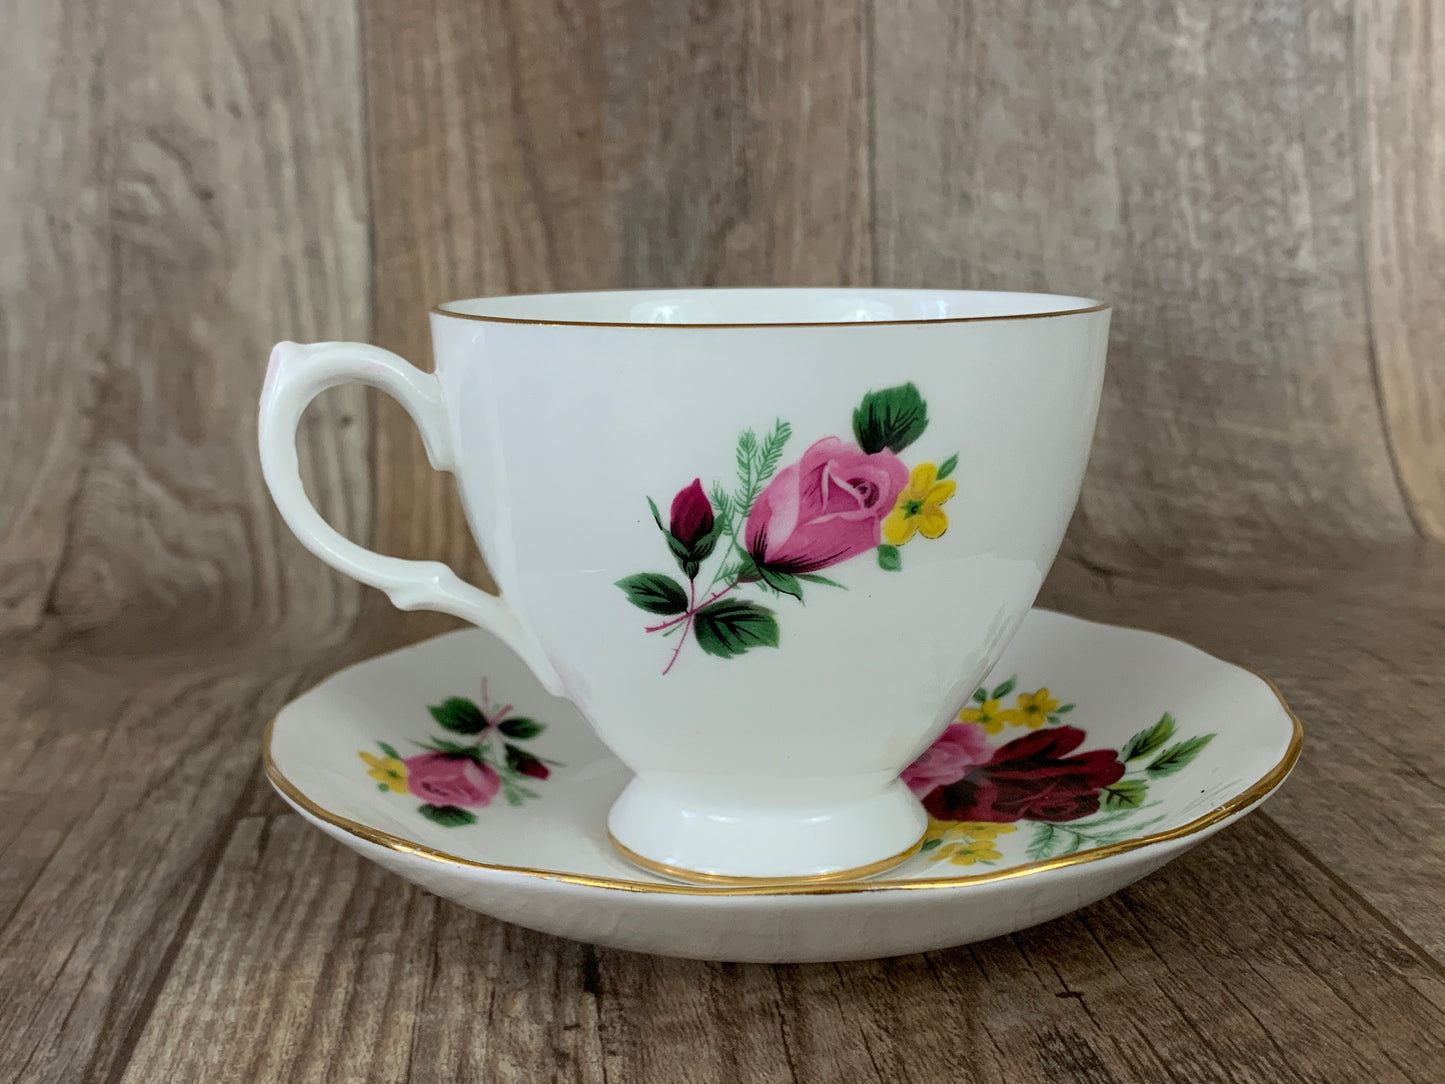 Pink and Red Floral Teacup and Saucer Gifts for Mom Vintage China Teacups